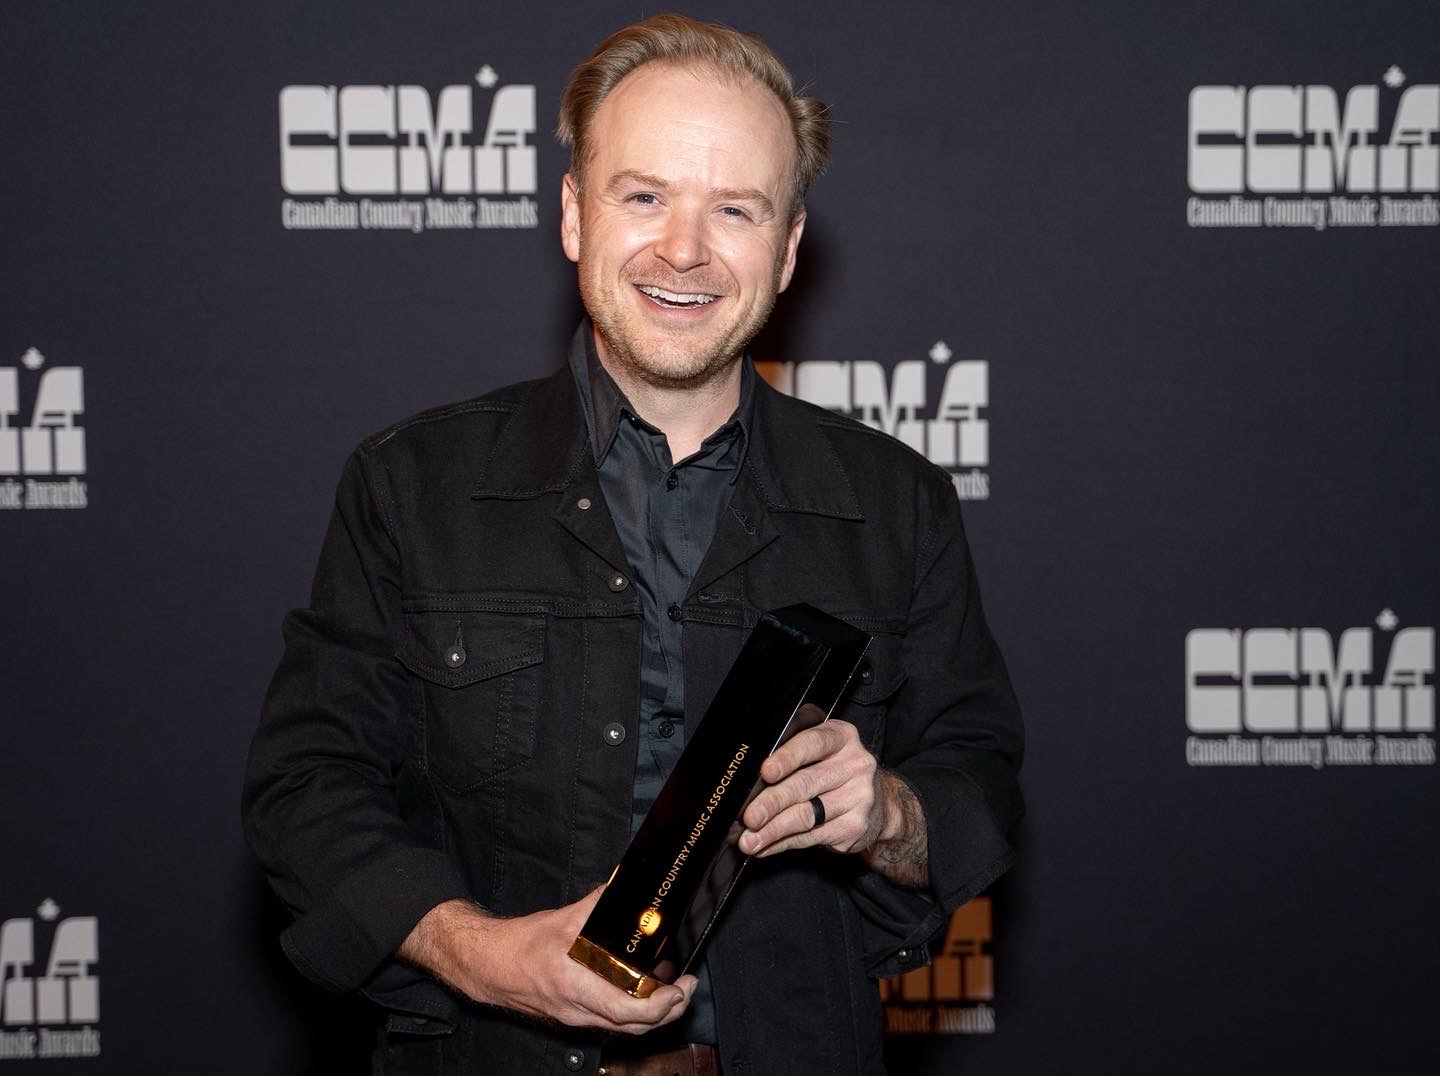 Five time CCMA Guitarist of the Year - Matty McKay